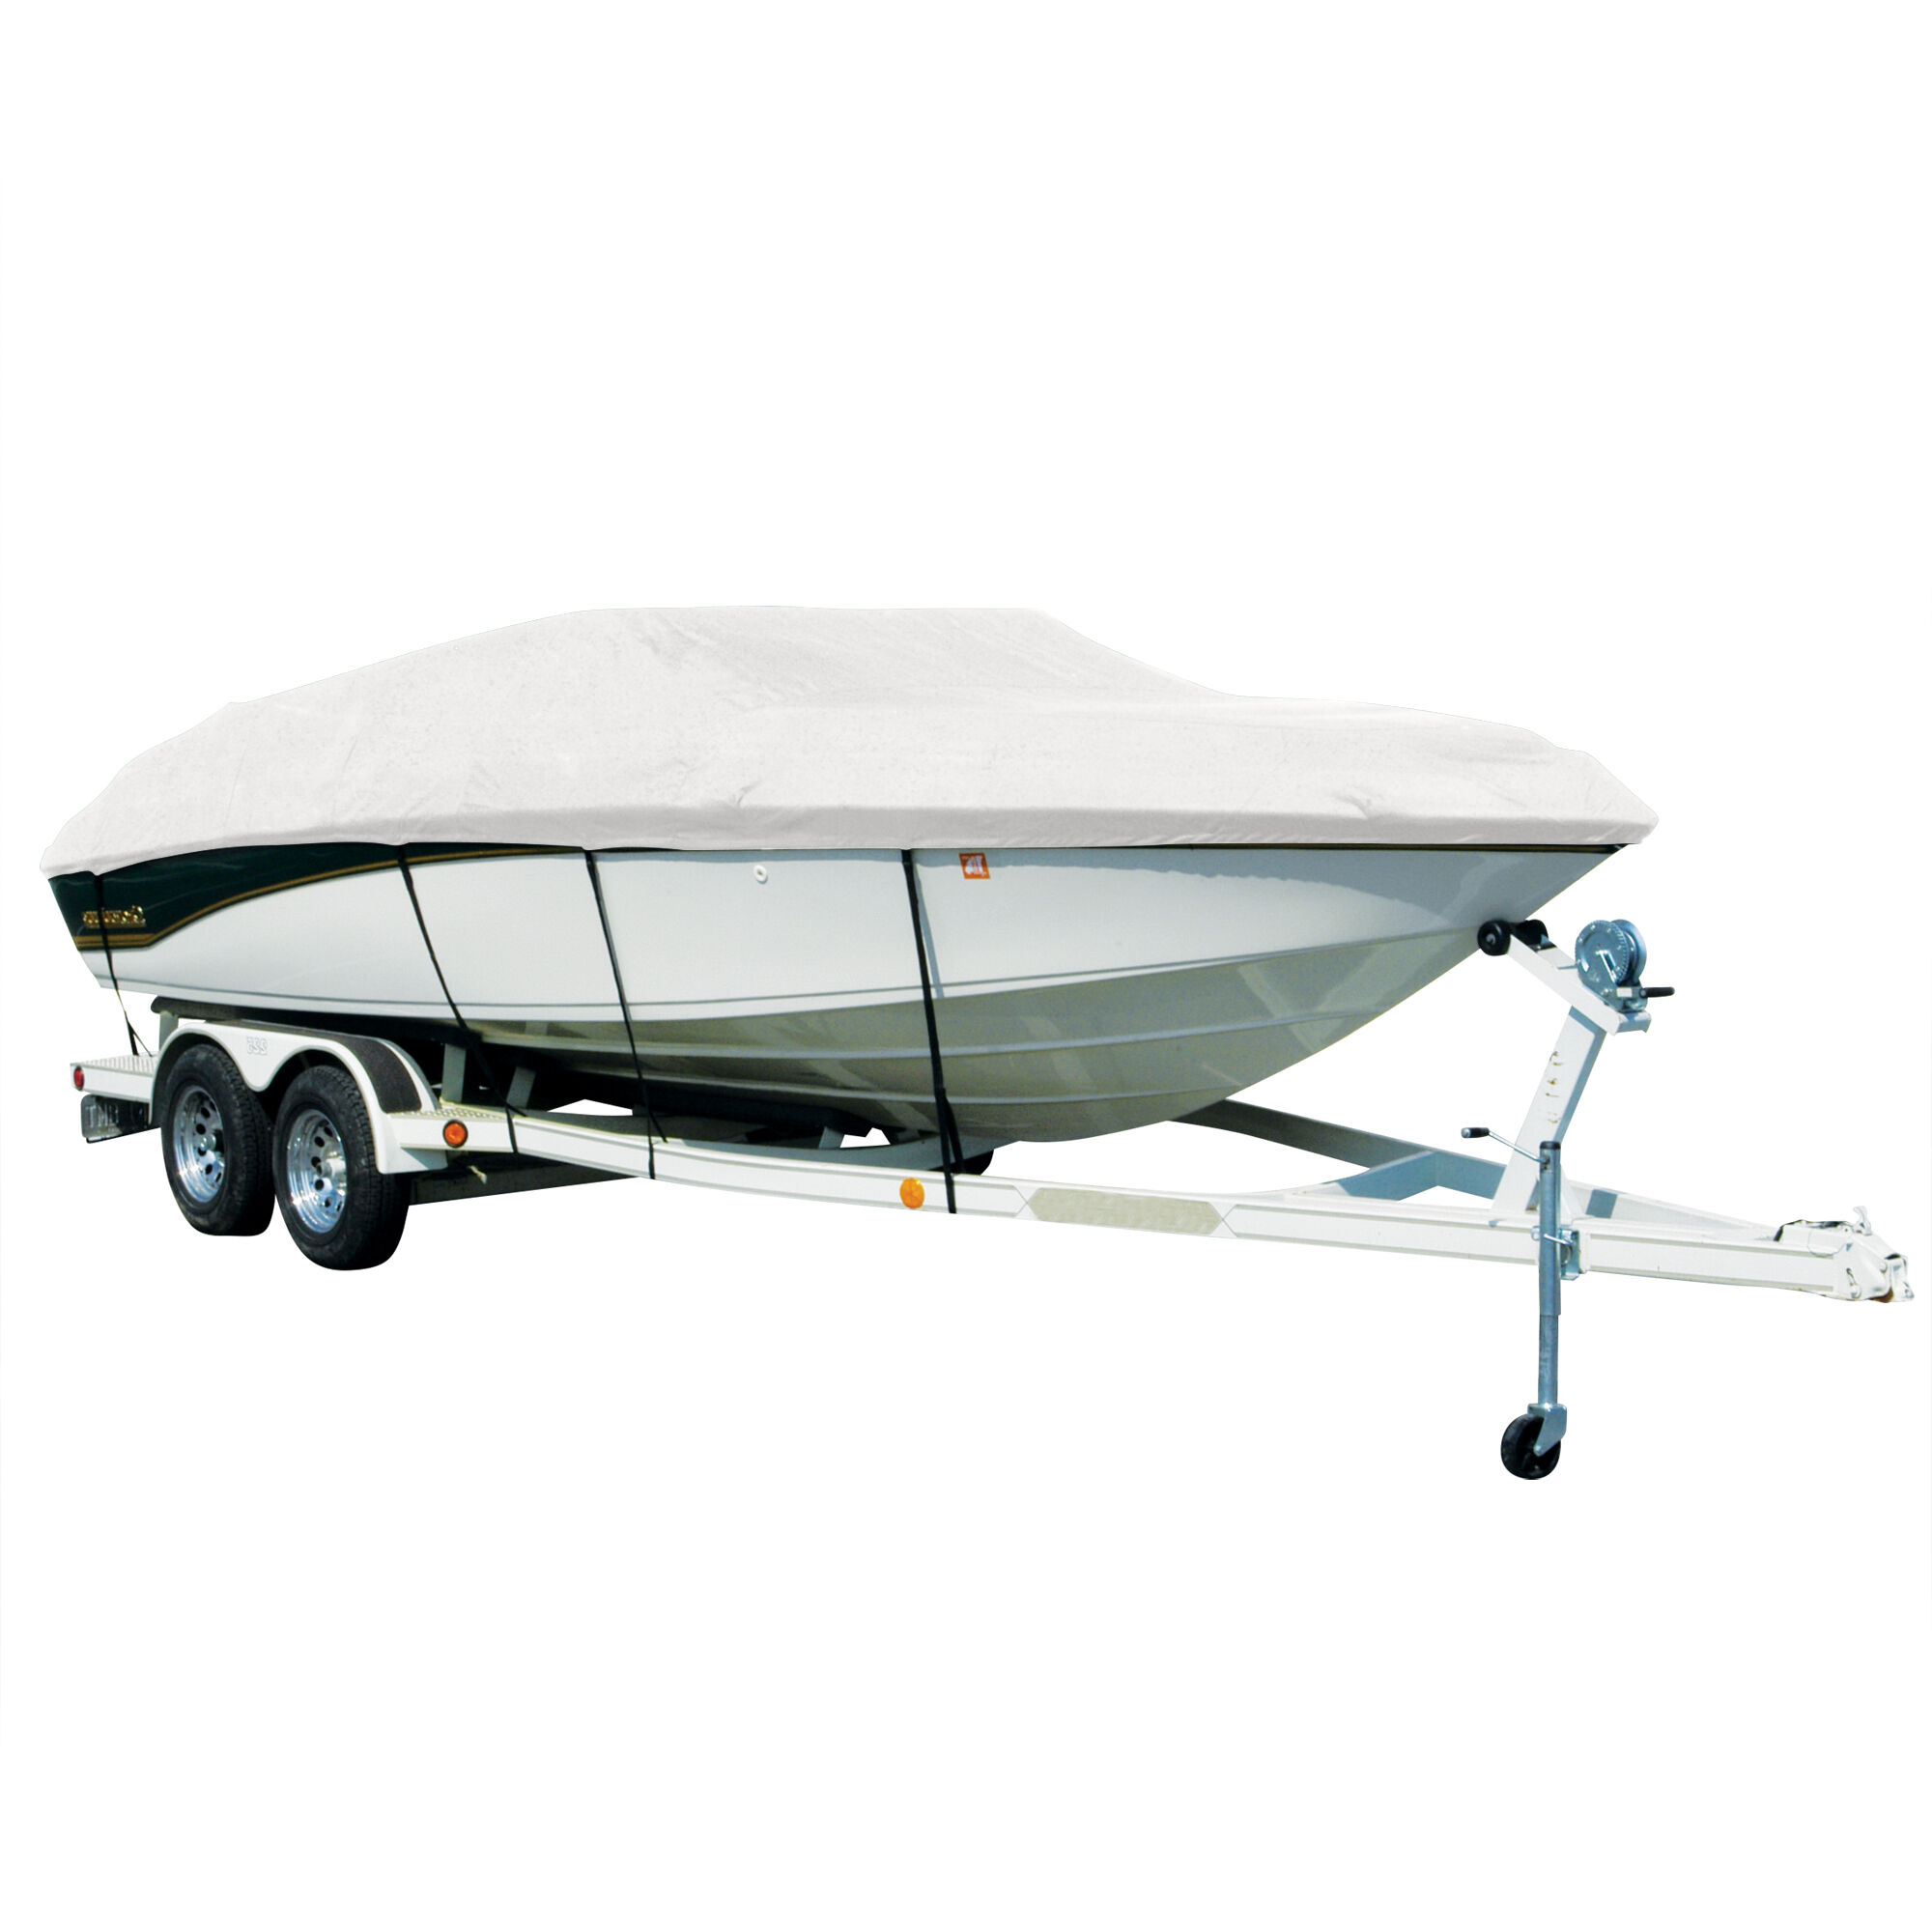 Covermate Sharkskin Plus Exact-Fit Cover for Crownline 202 Lpx Sport 202 Lpx Sport Bowrider Does Not Cover PLATFORMm I/O. White